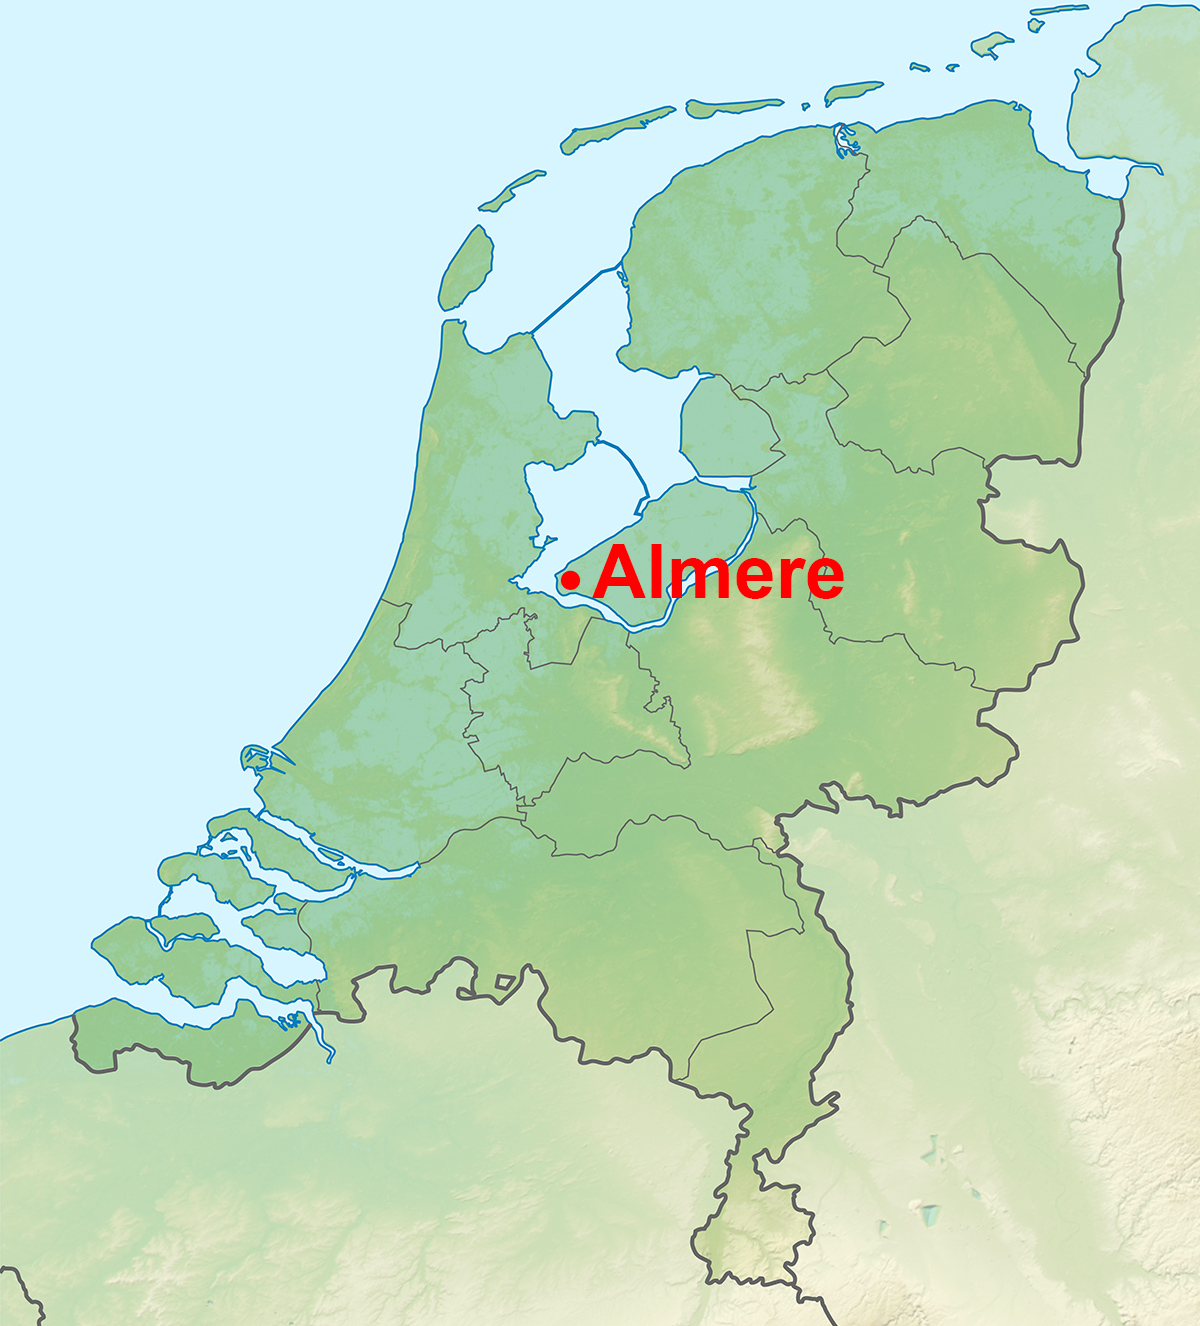 Location of Almere City on the Netherlands Map